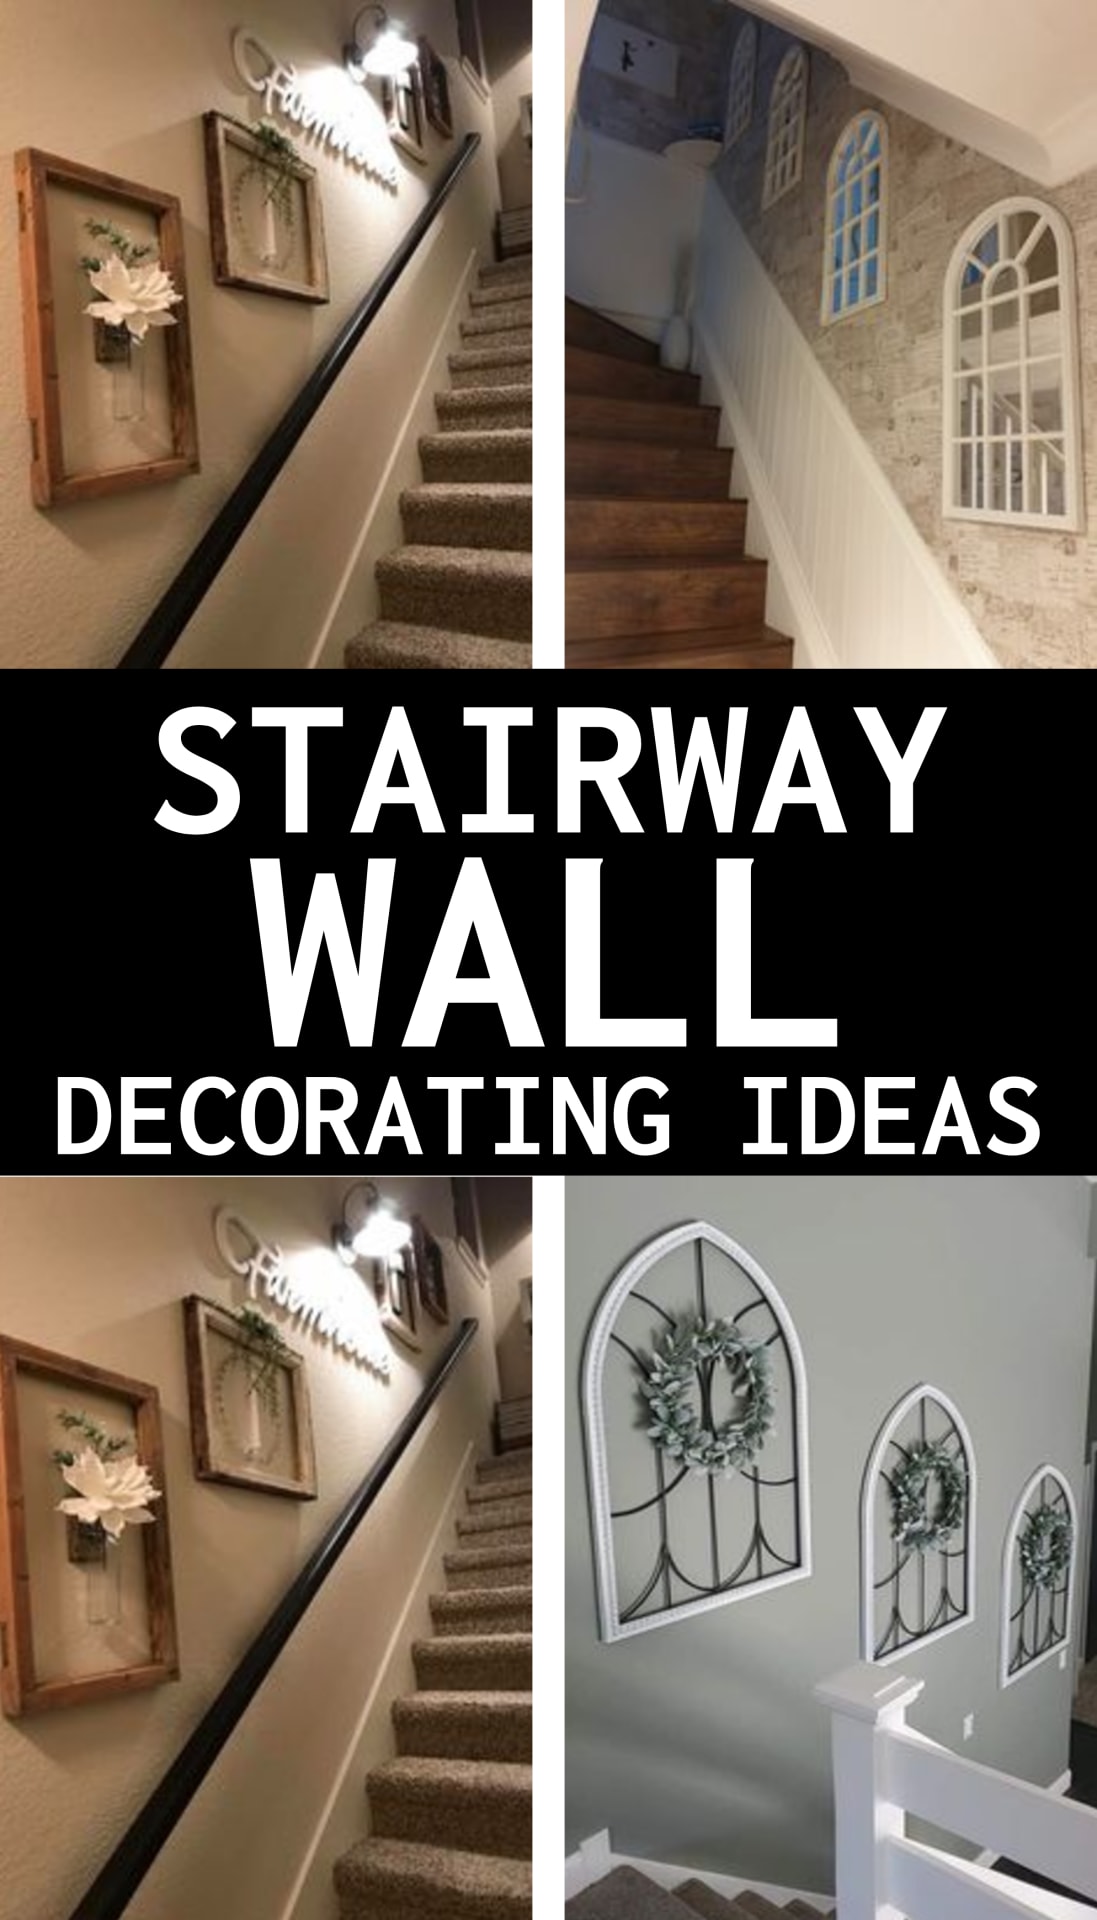 stairway wall decorating ideas